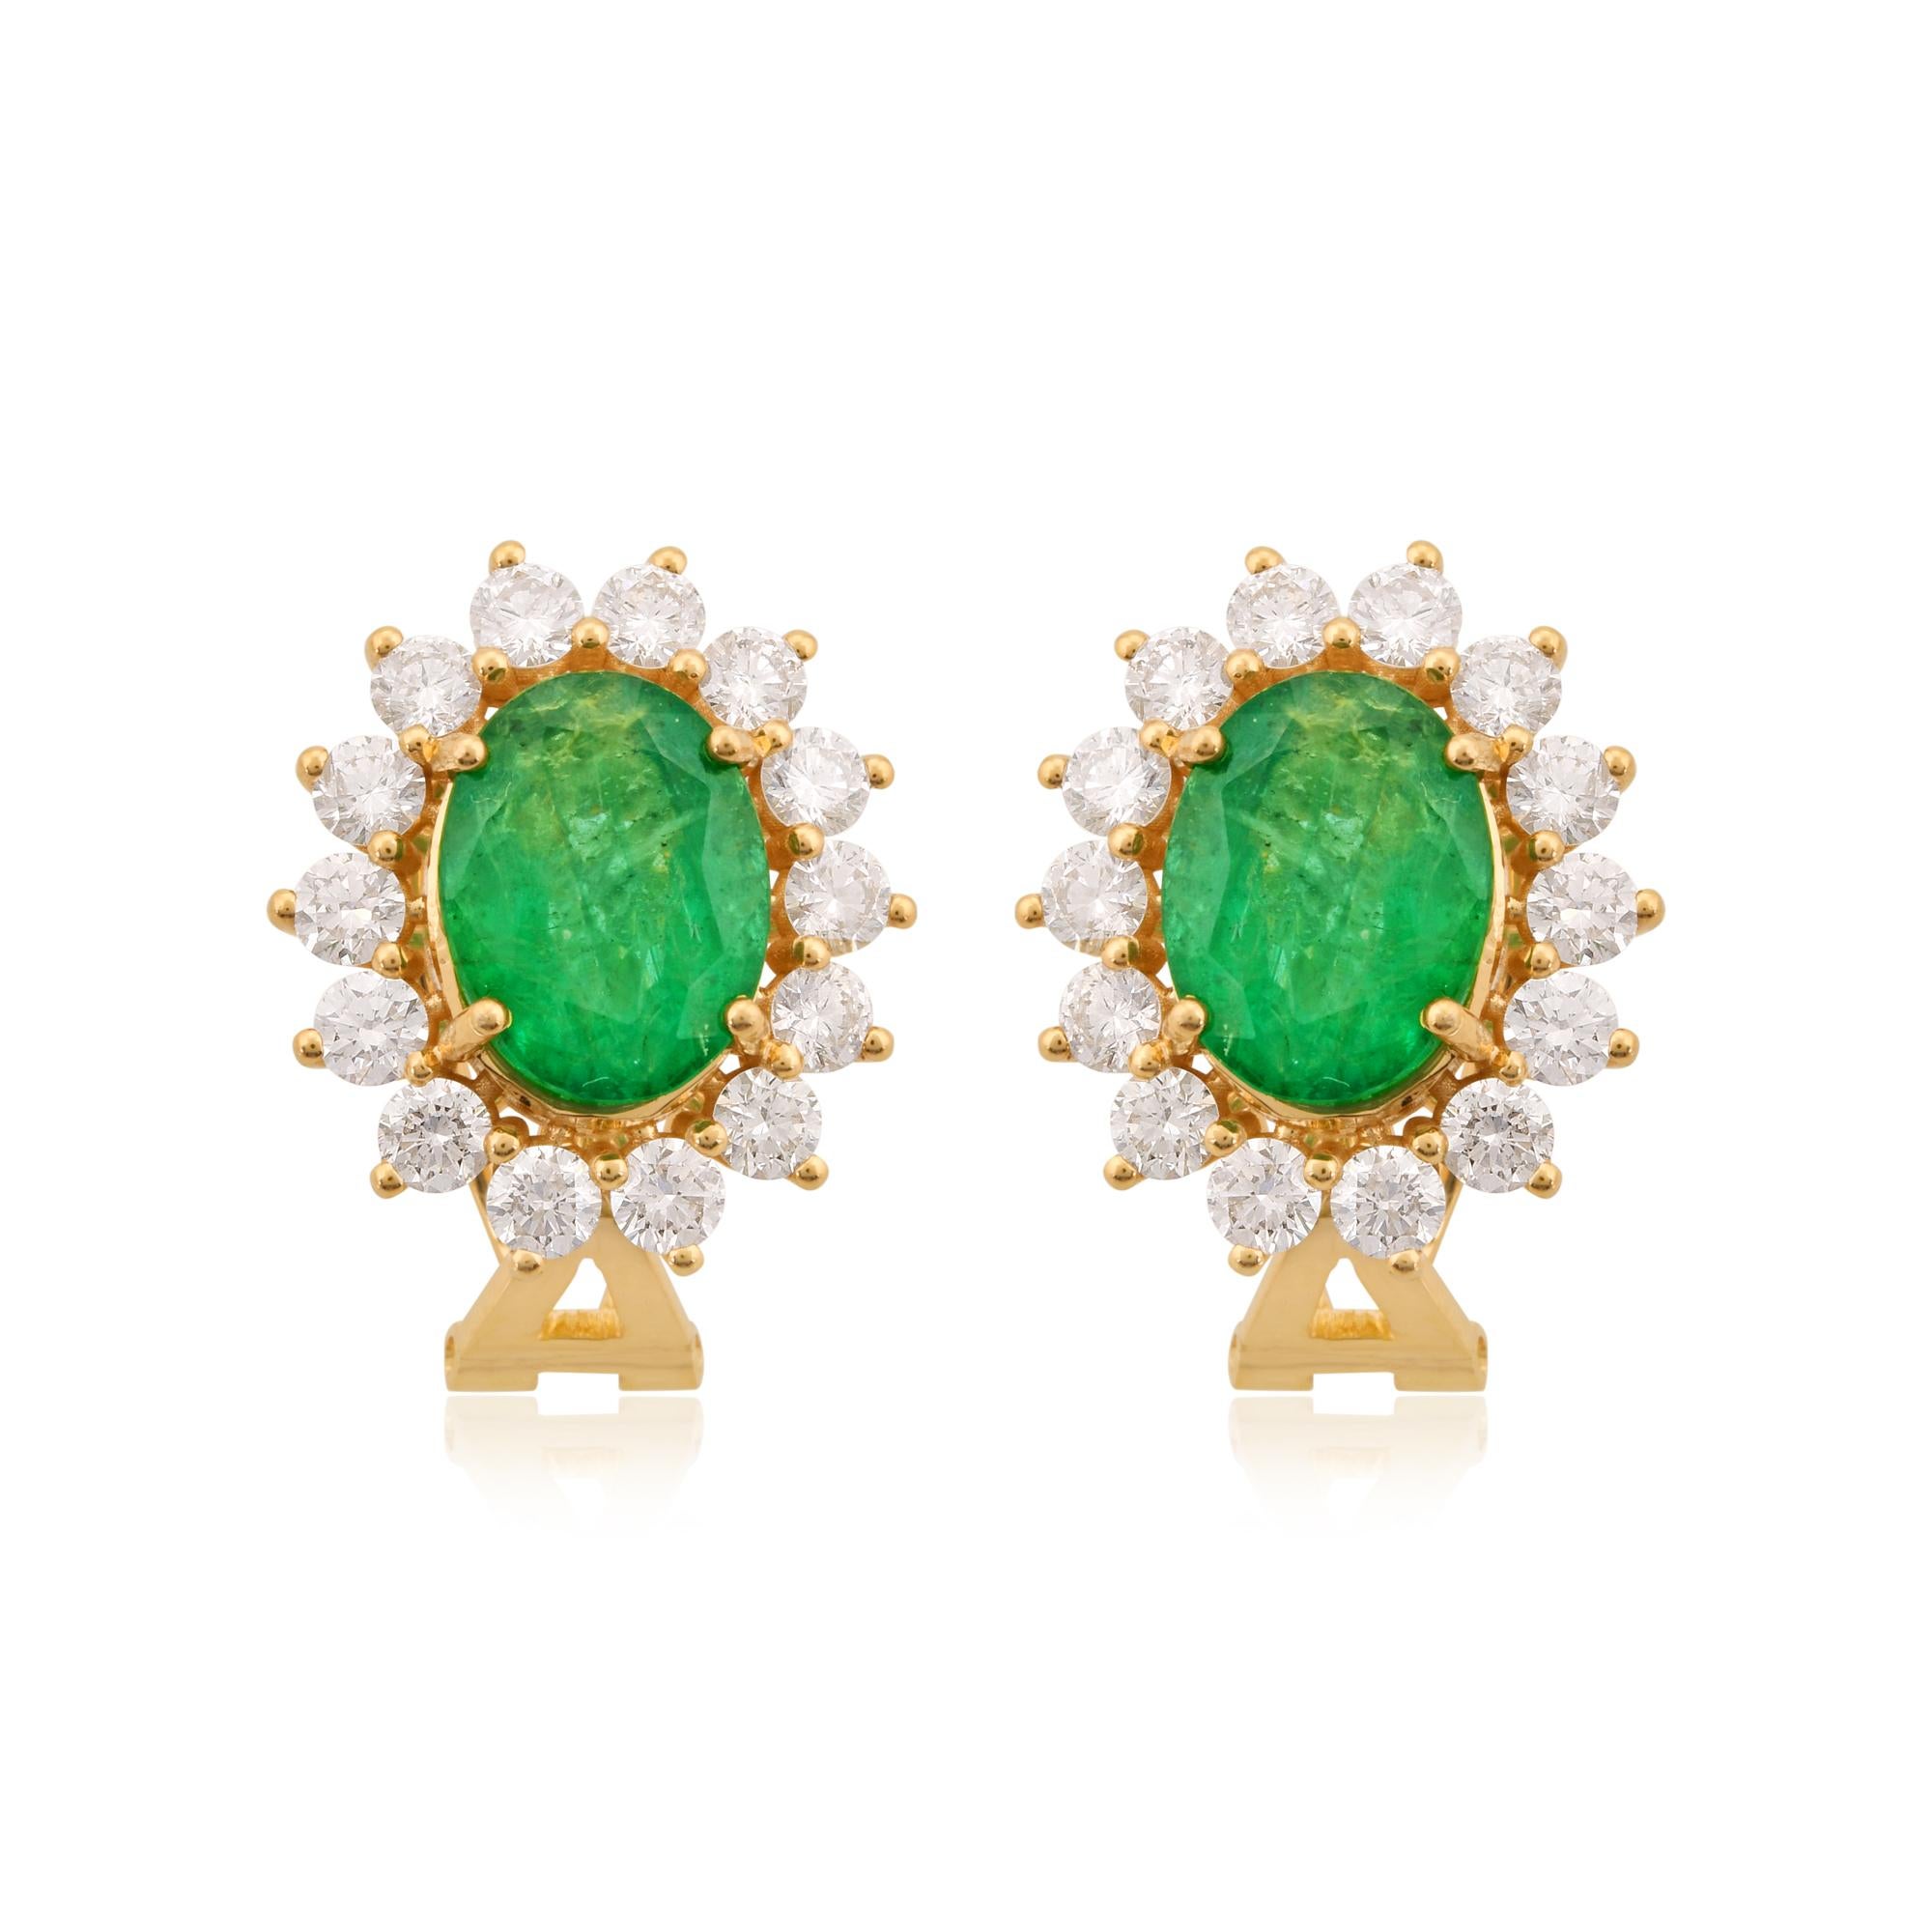 Item Code :- STE-1215
Gross Wt :- 8.33 gm
10k Yellow Gold Wt :- 6.32 gm
Diamond Wt :- 2.81 carat  ( AVERAGE DIAMOND CLARITY SI1-SI2 & COLOR H-I )
Emerald Wt :- 7.26 carat
Earrings Size :- 22x15 mm approx.
✦ Sizing
.....................
We can adjust